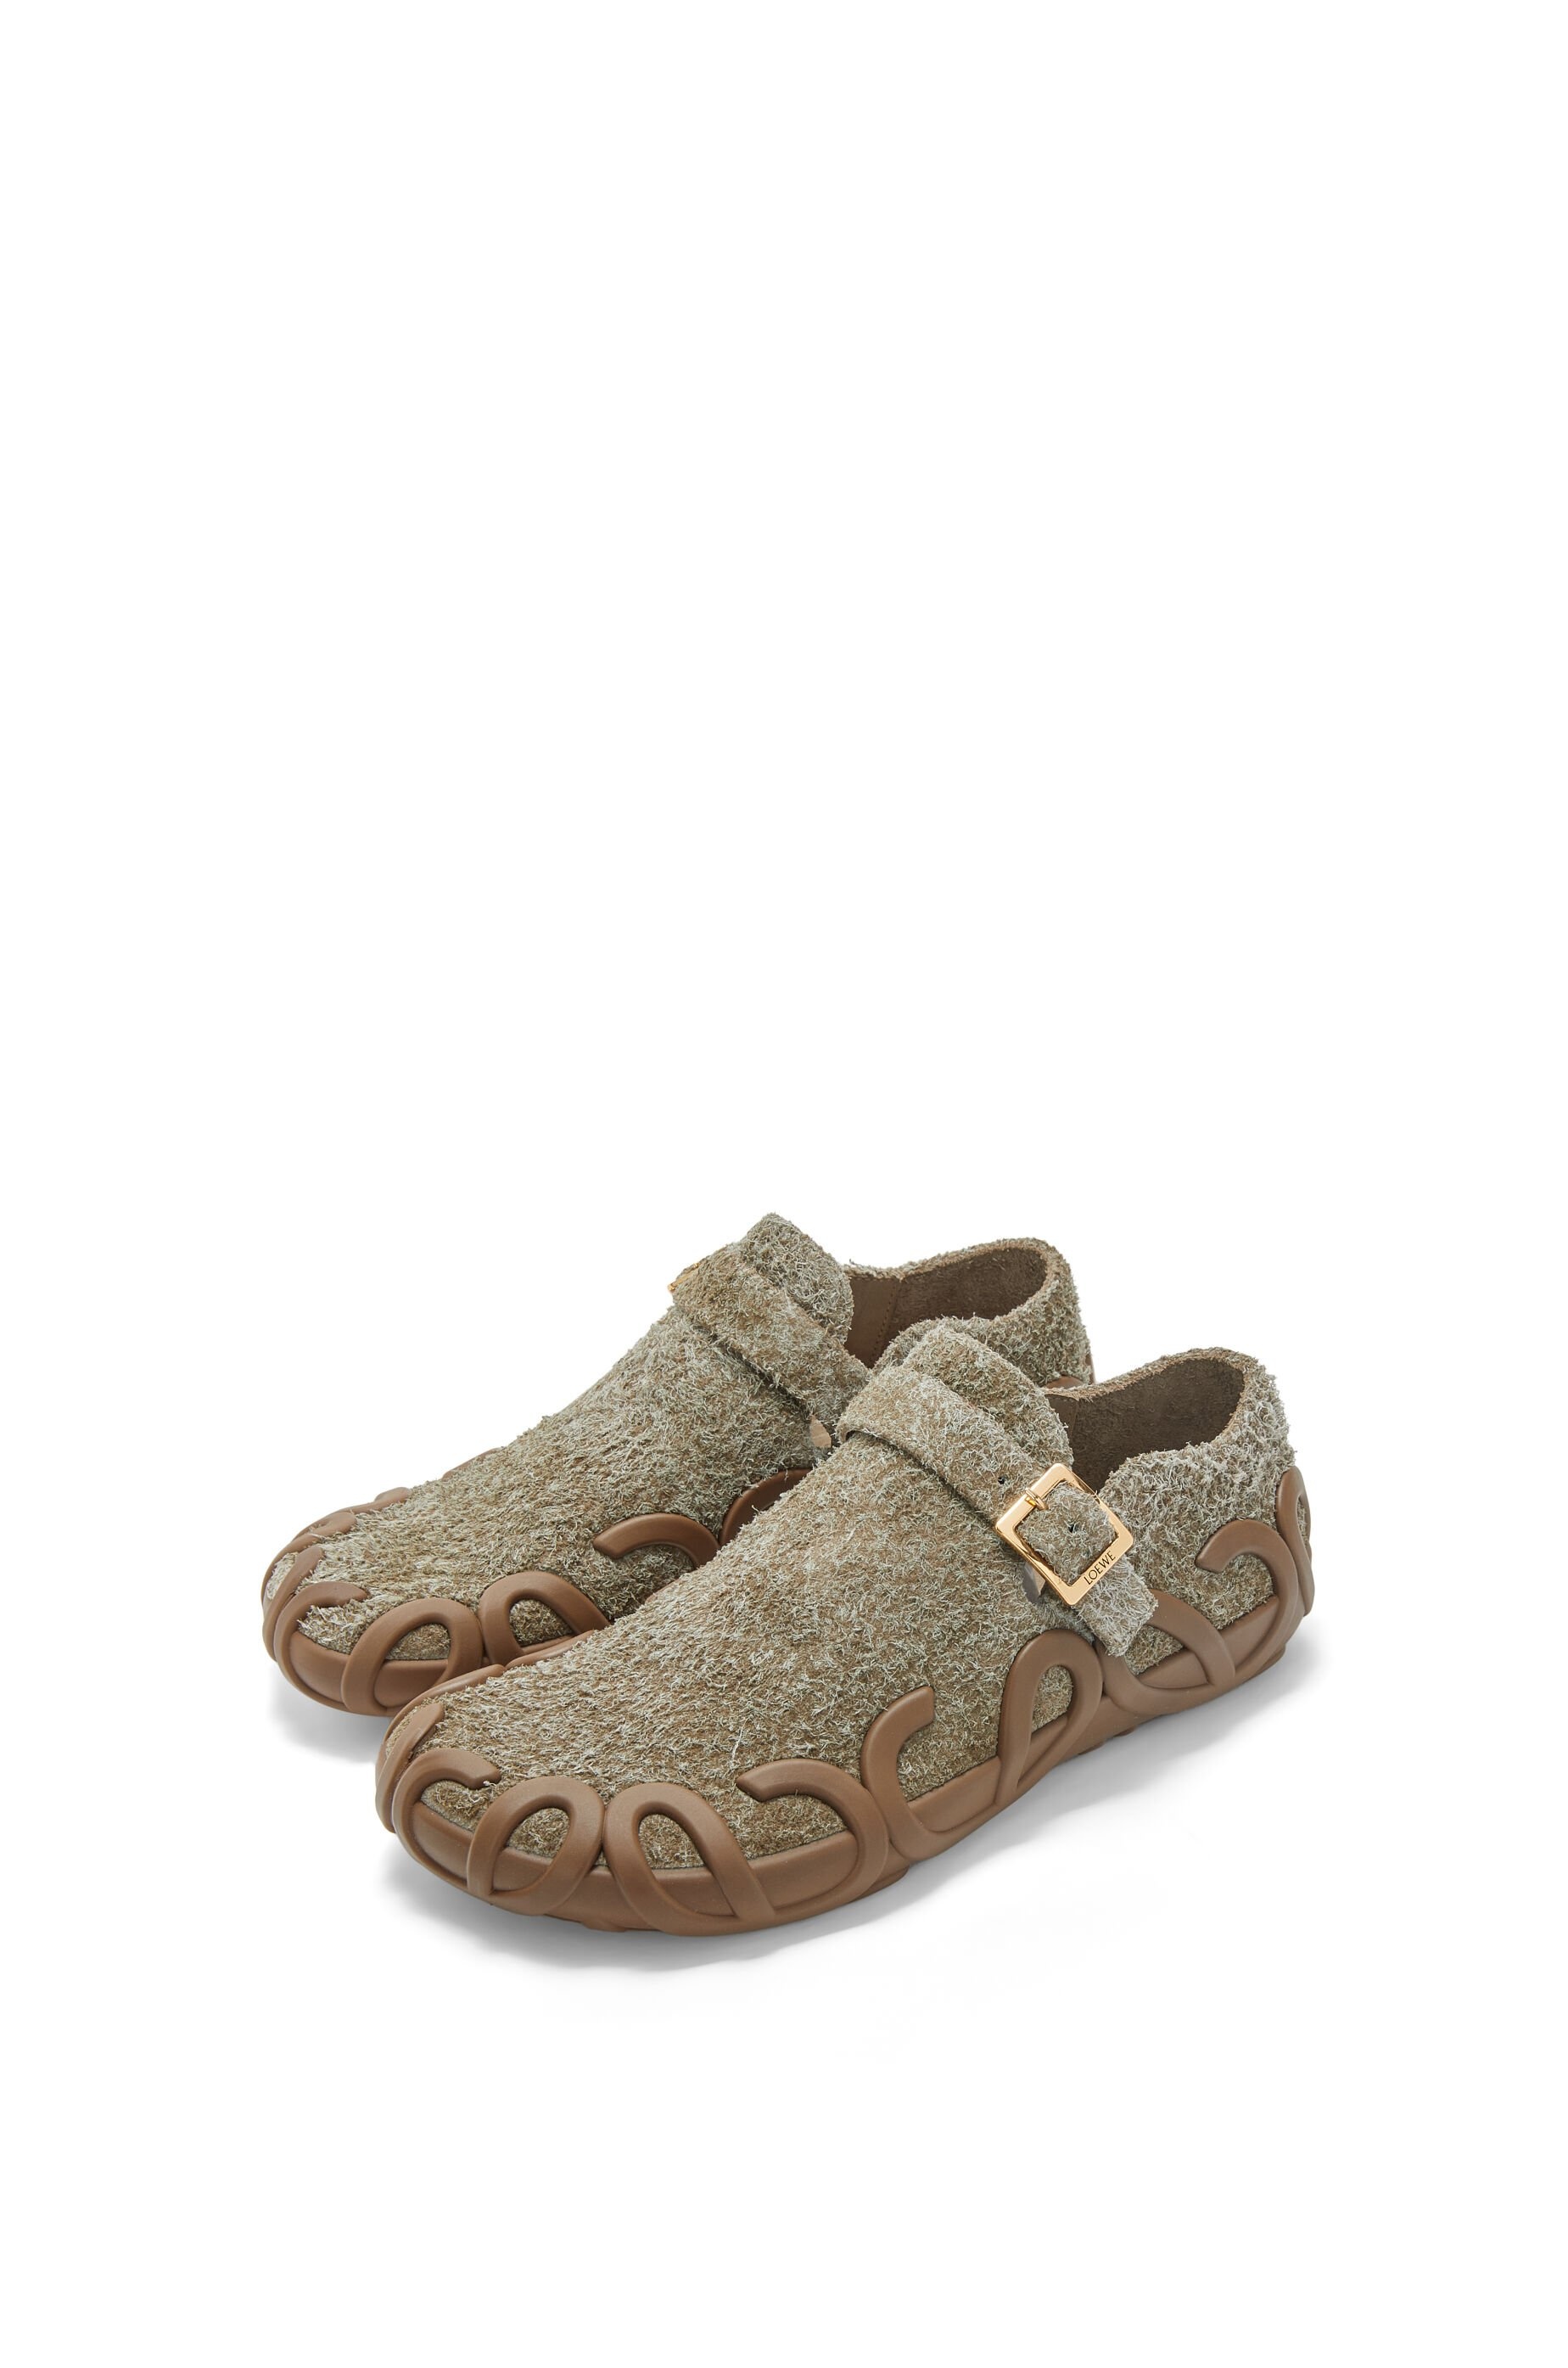 Rise loafer in brushed suede - 2